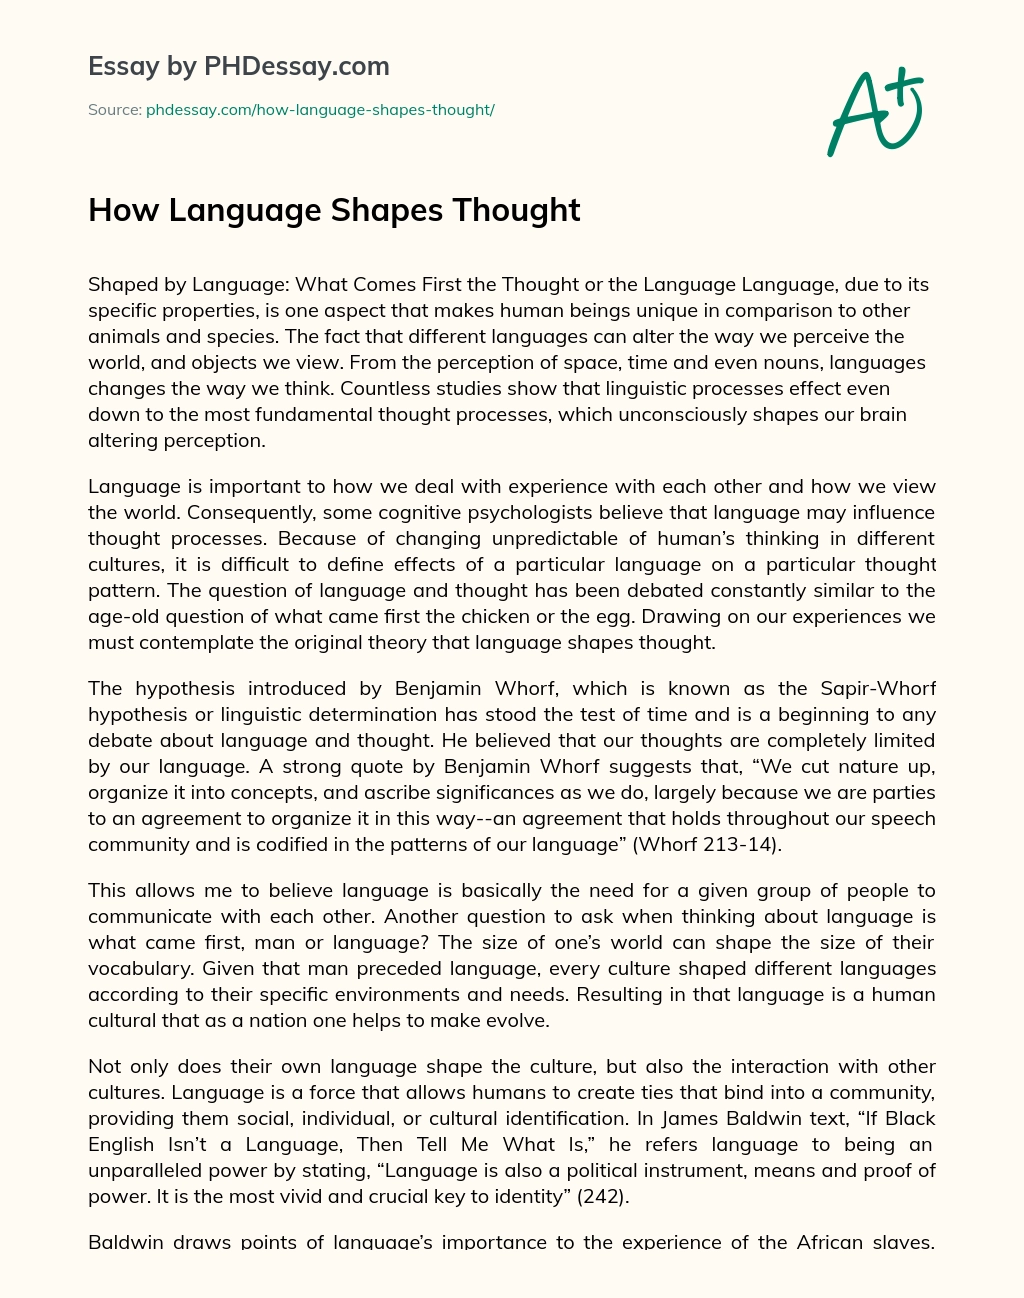 How Language Shapes Thought essay